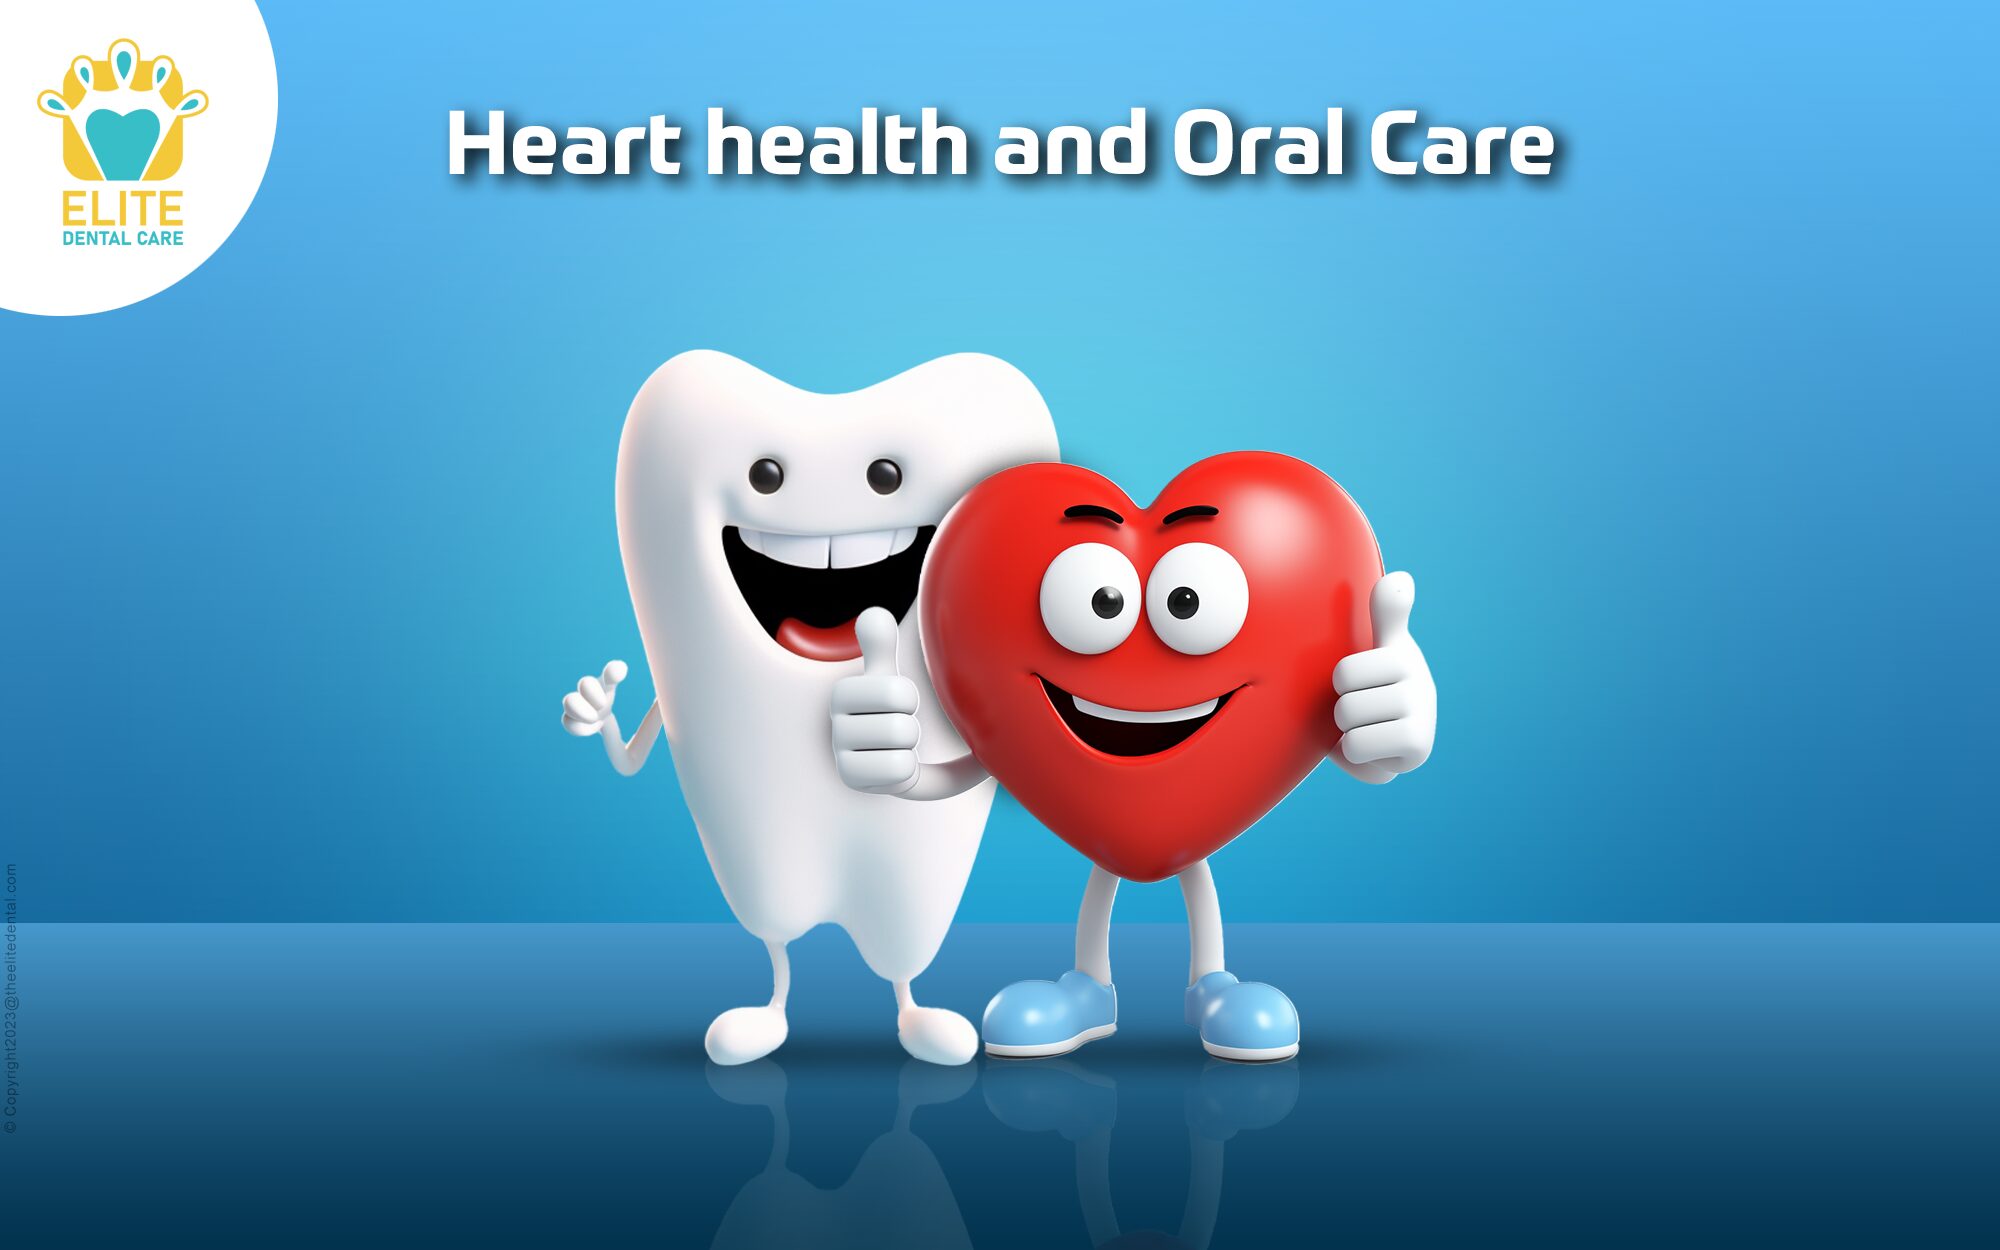 HEART HEALTH AND ORAL CARE